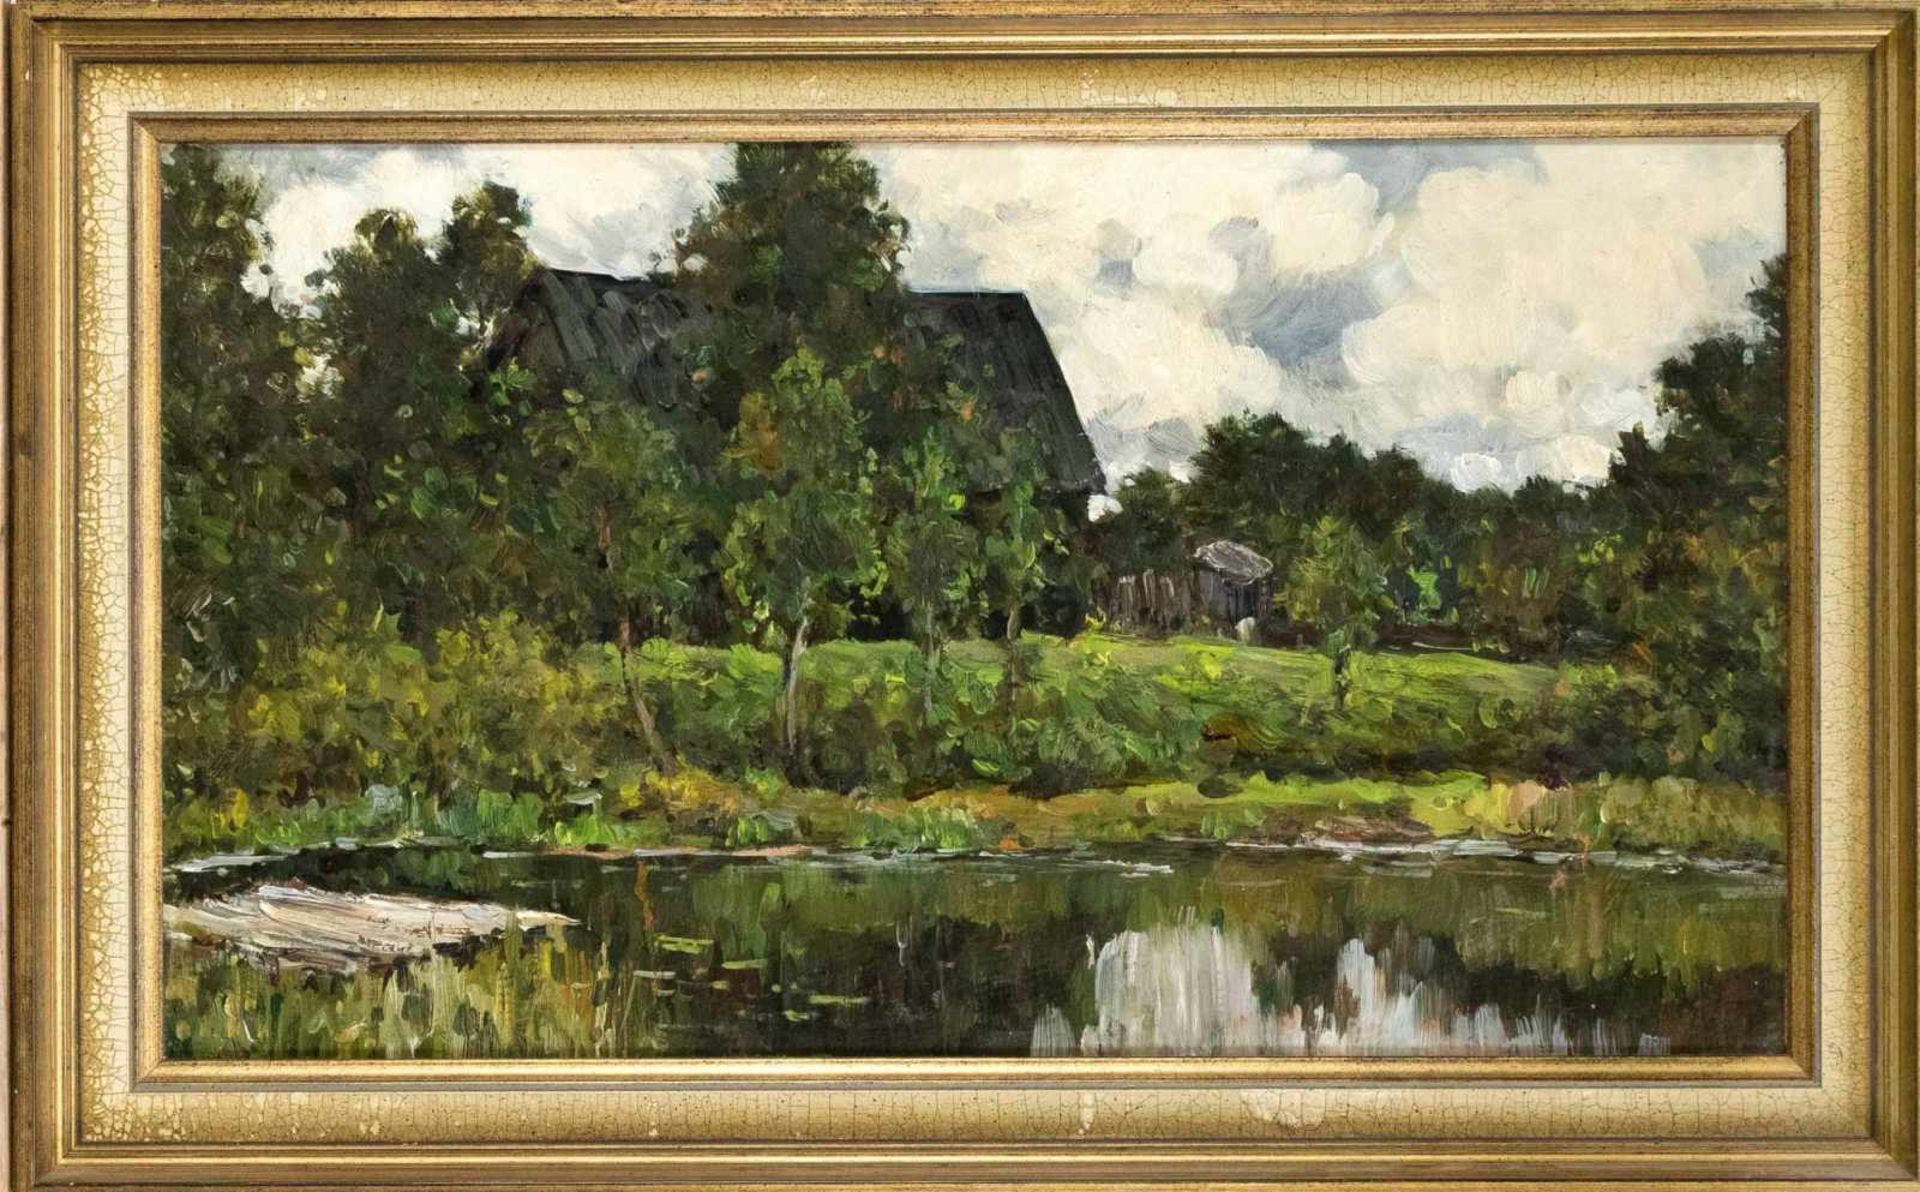 Ref. Aralov, Russian painter 2nd half of the 20th century, country house with pond, oil on